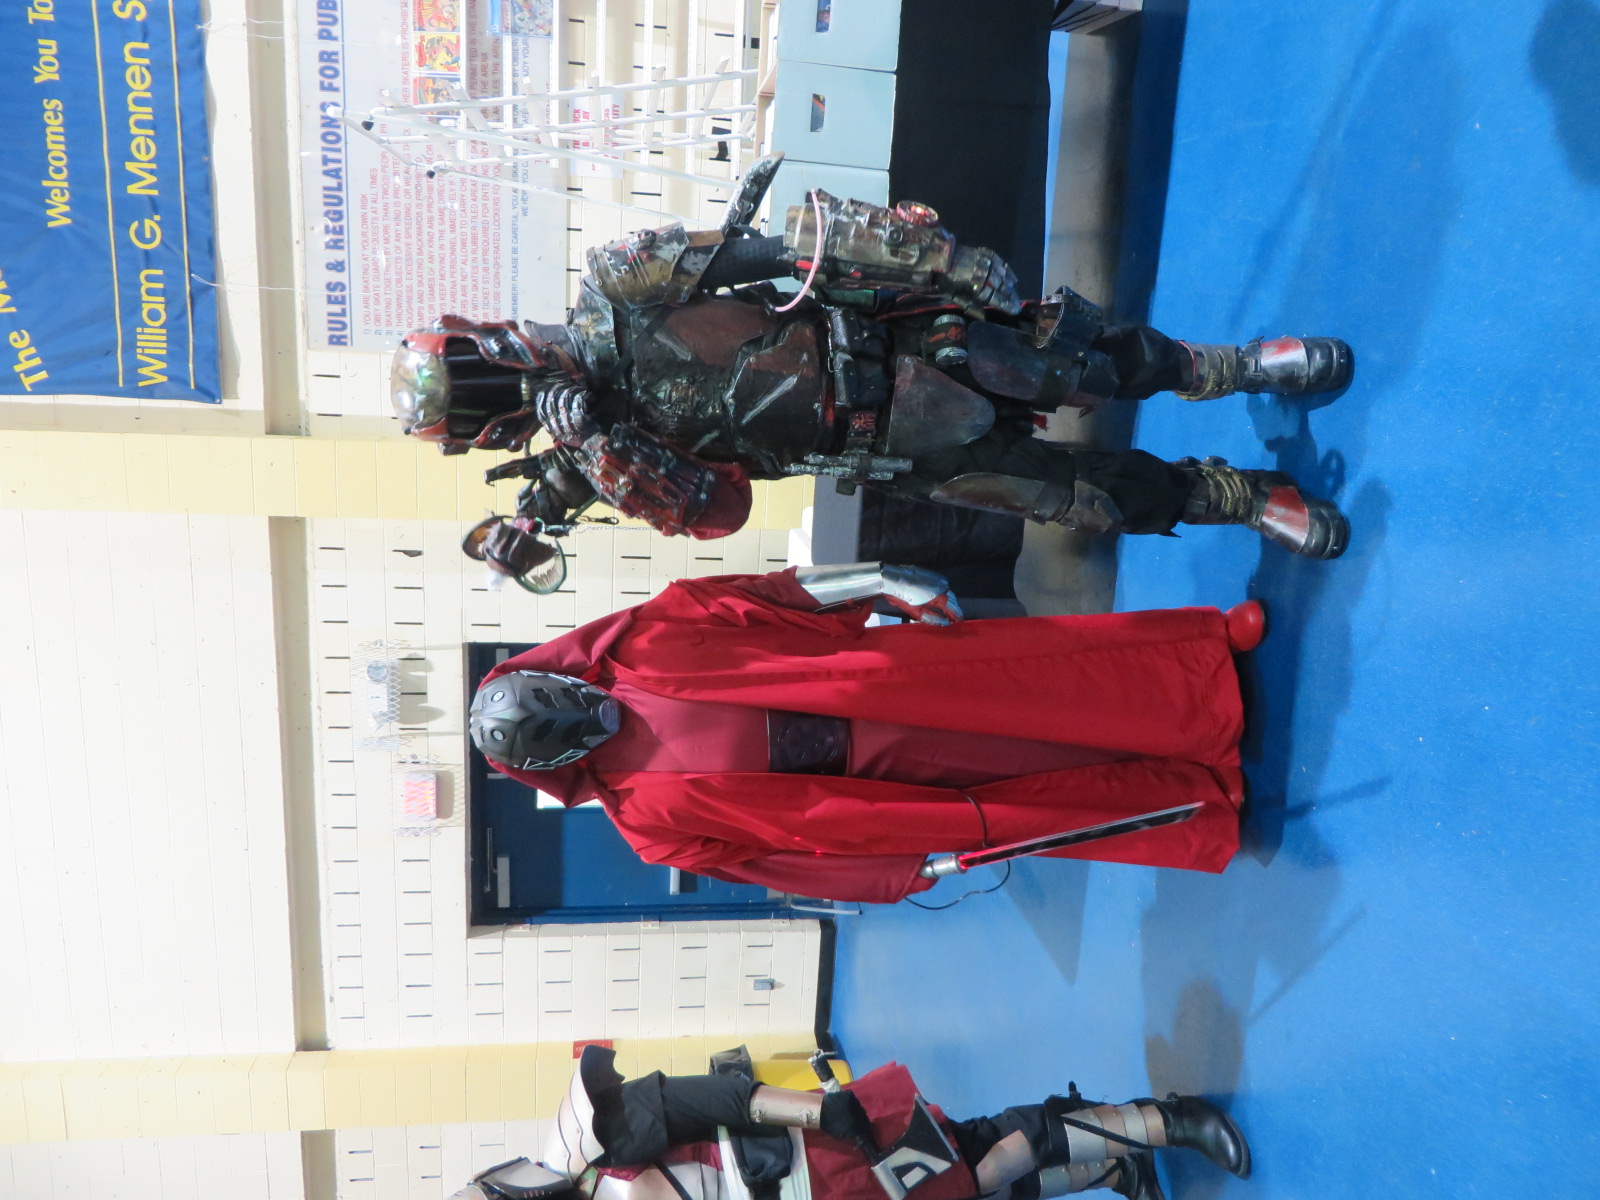 gscf2016_cosplay (15)